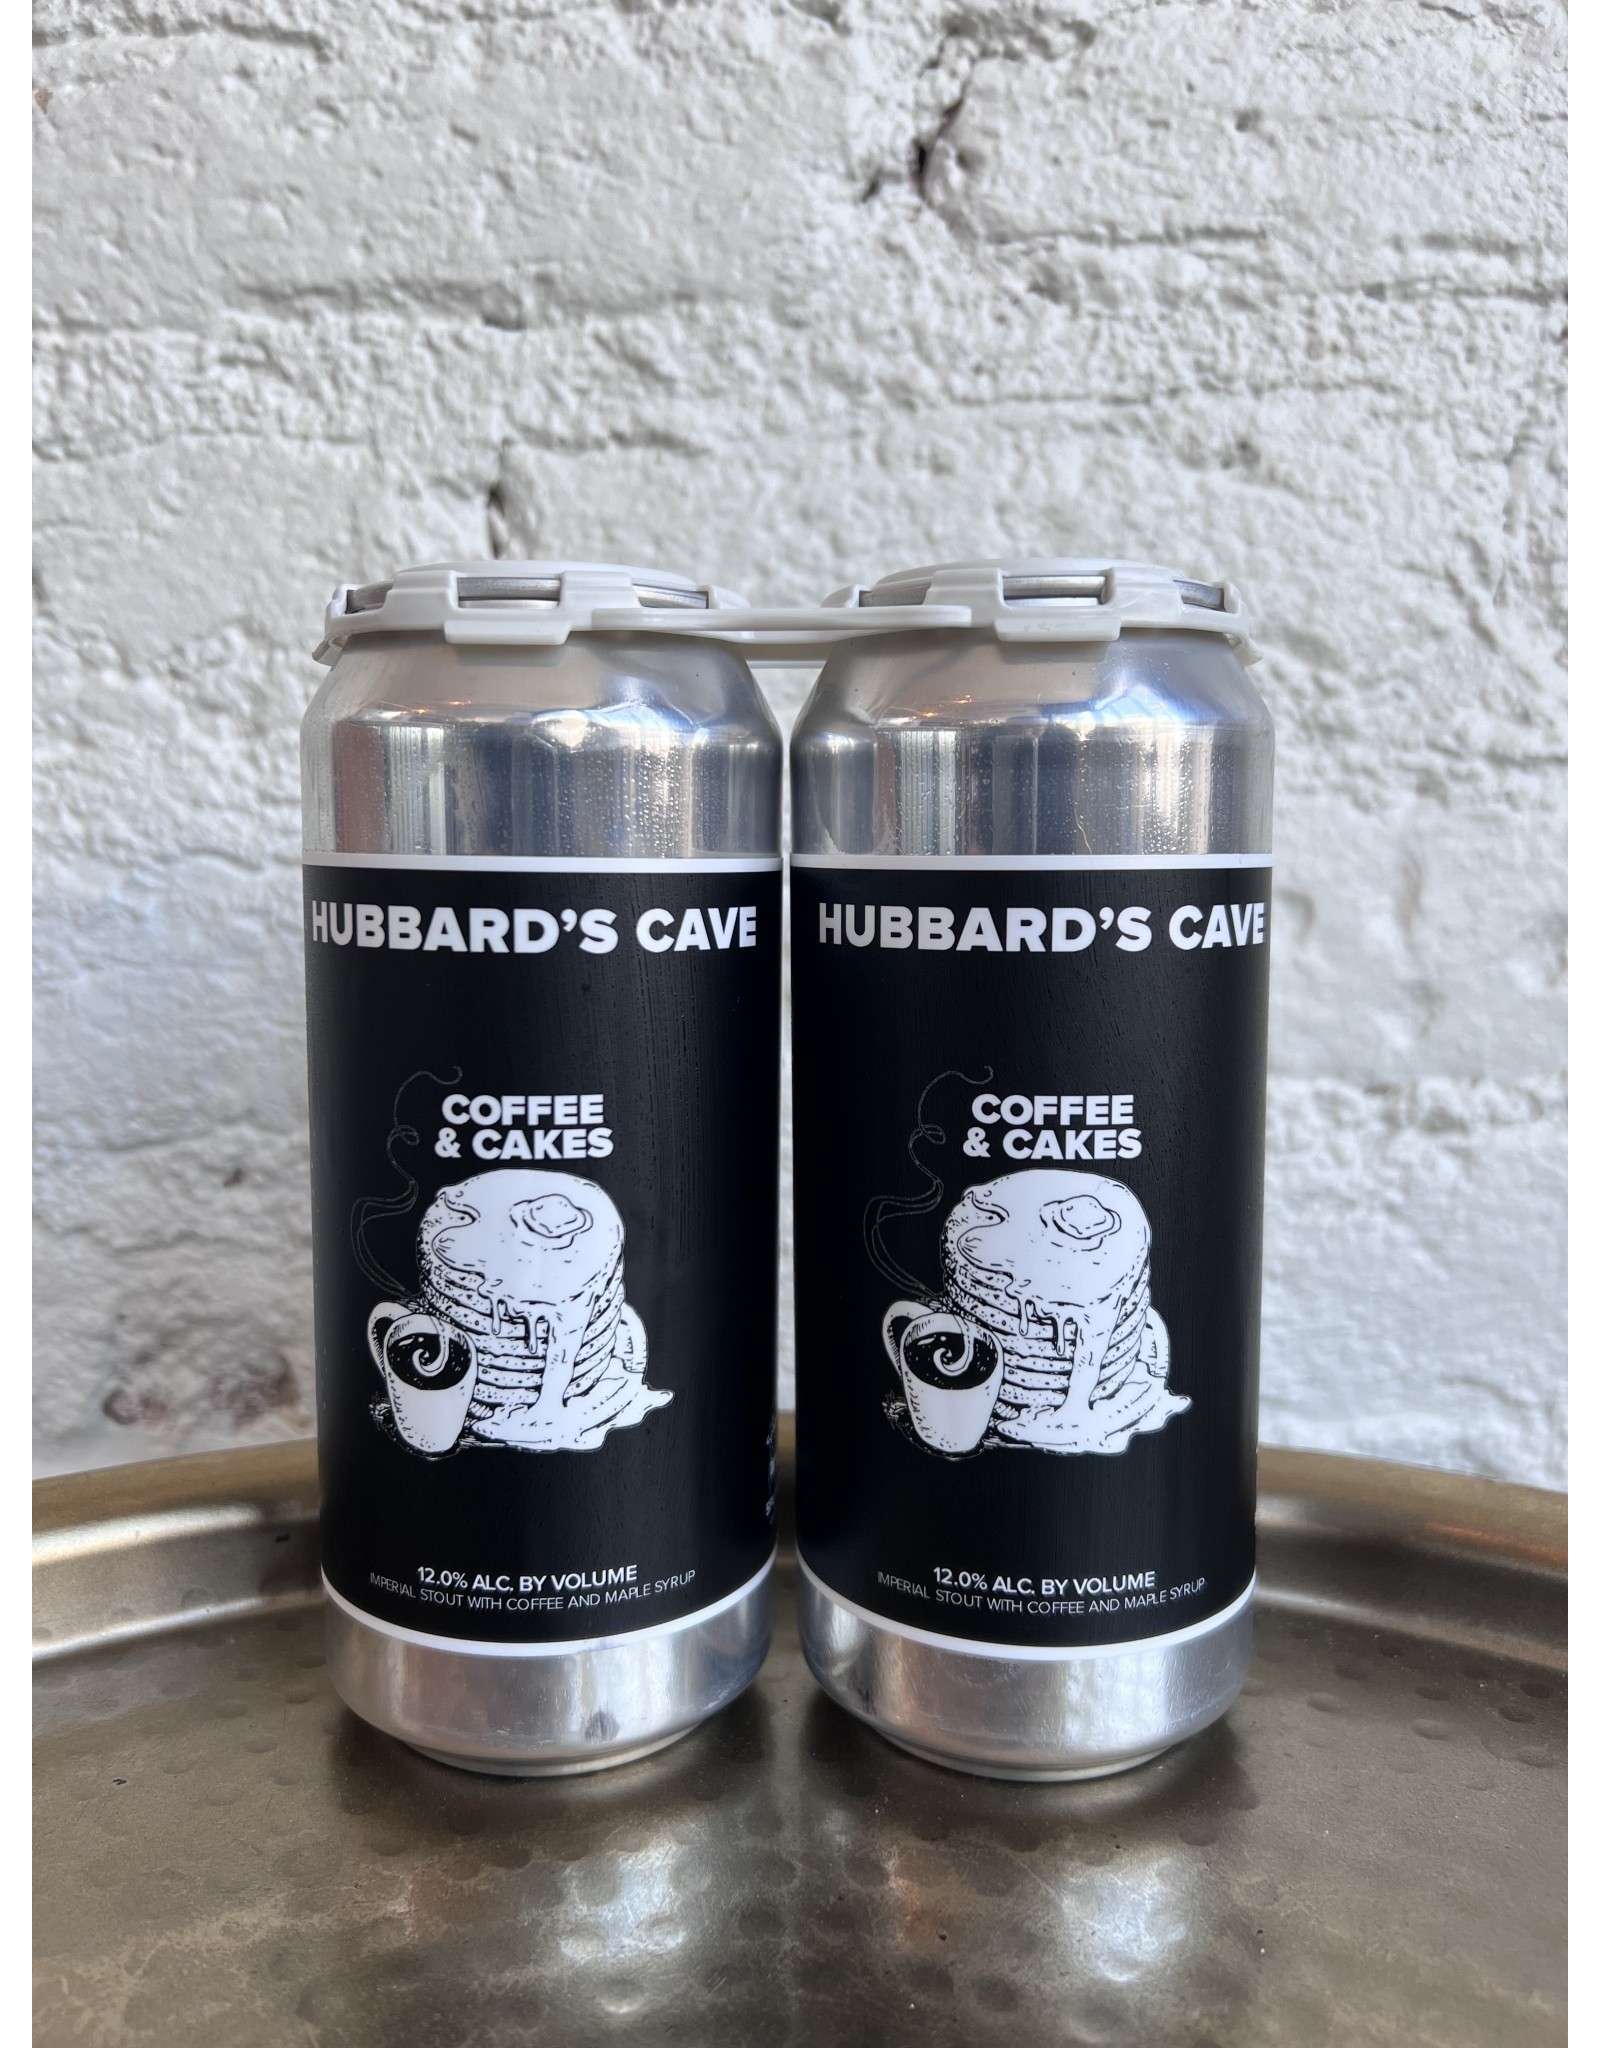 Hubbard's Cave, Coffee & Cakes, Imperial Stout w/ Coffee & Maple Syrup